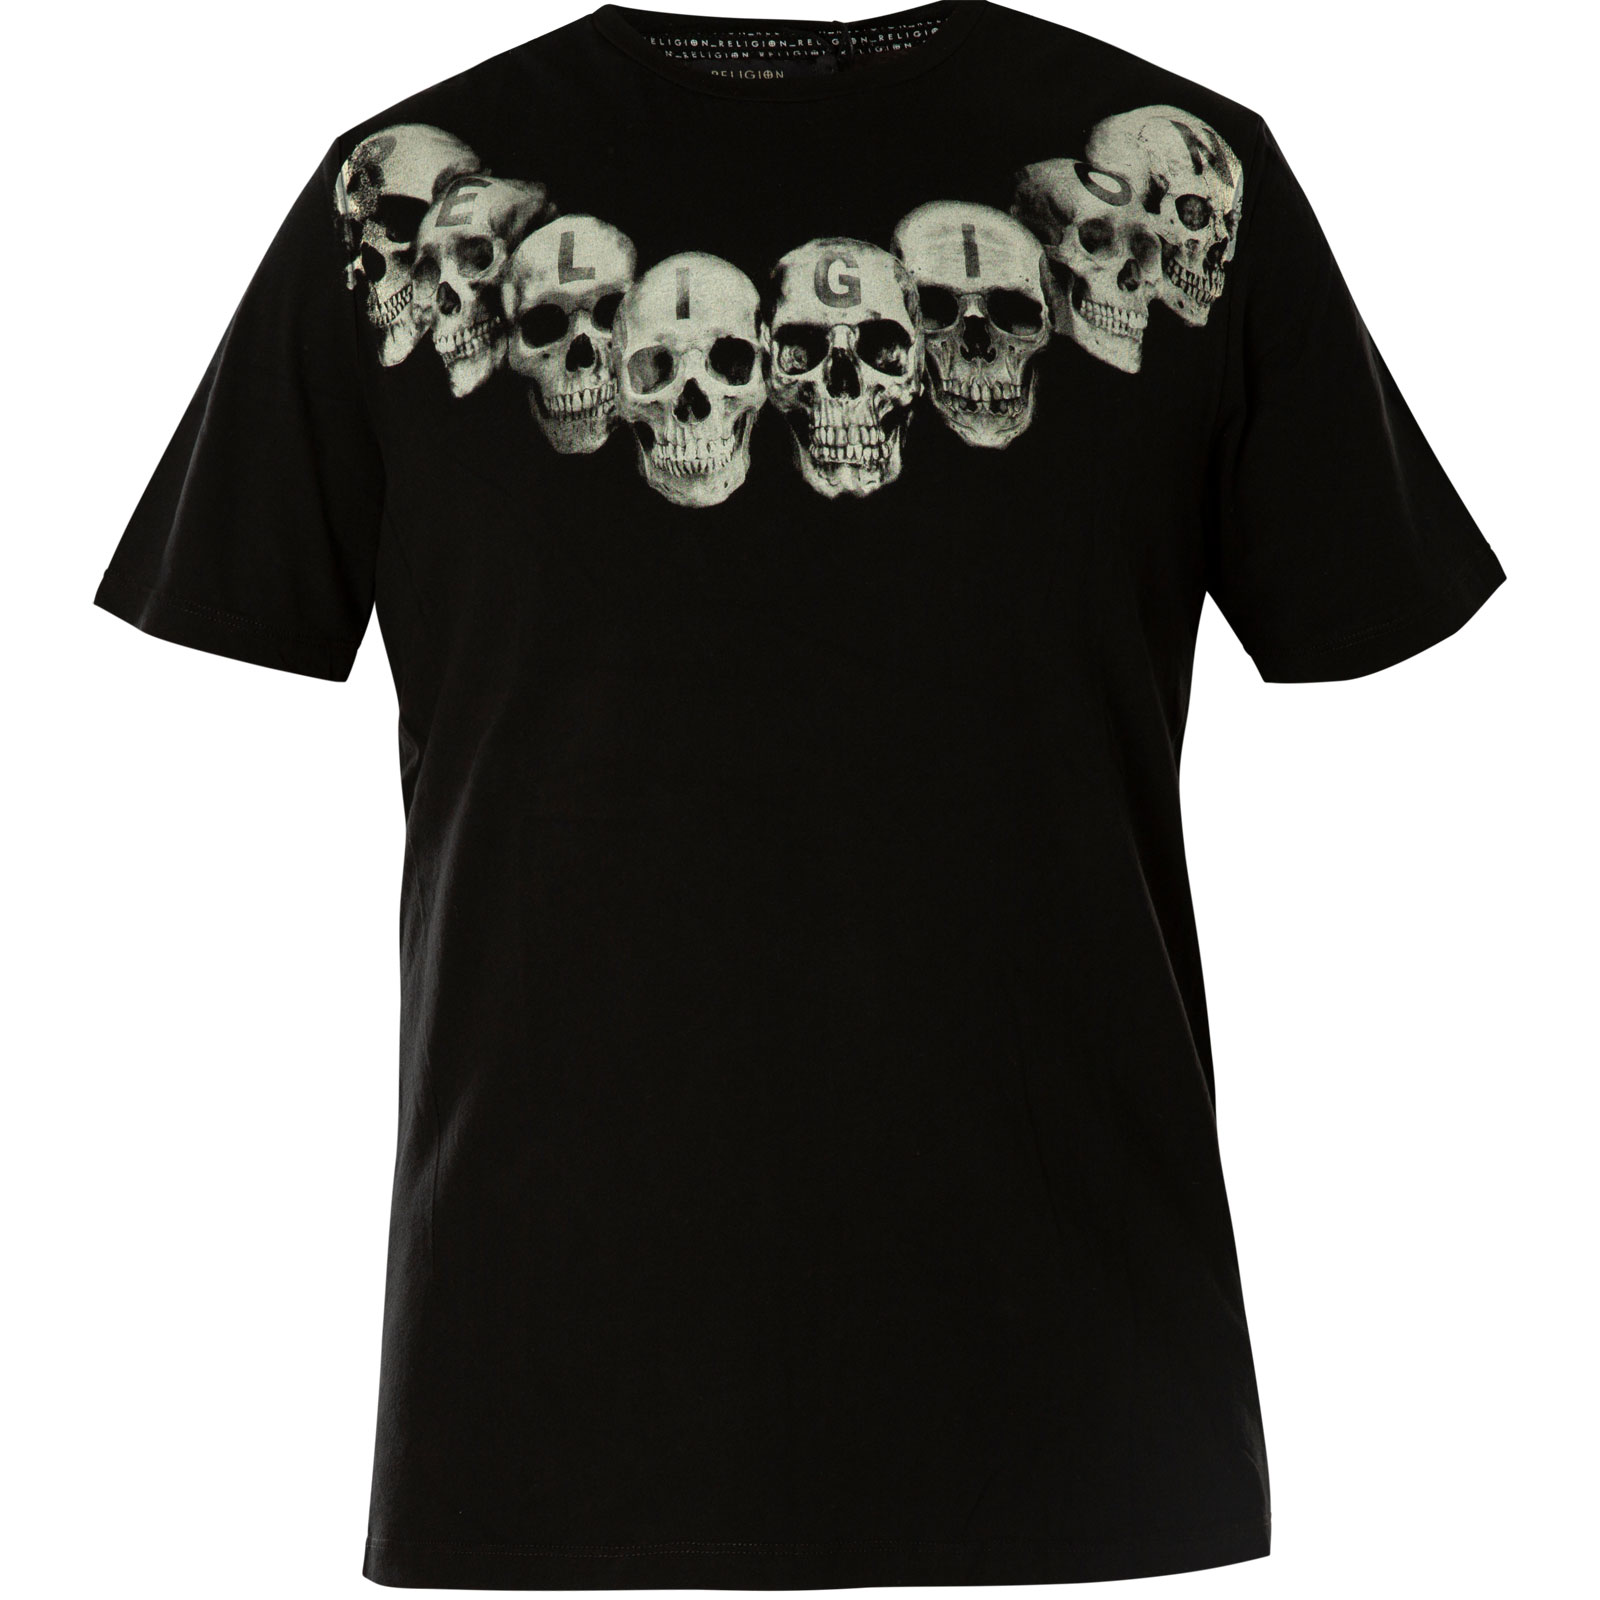 Religion T-Shirt Necklace Skull Tee 30BNSN03 Print featuring with skulls